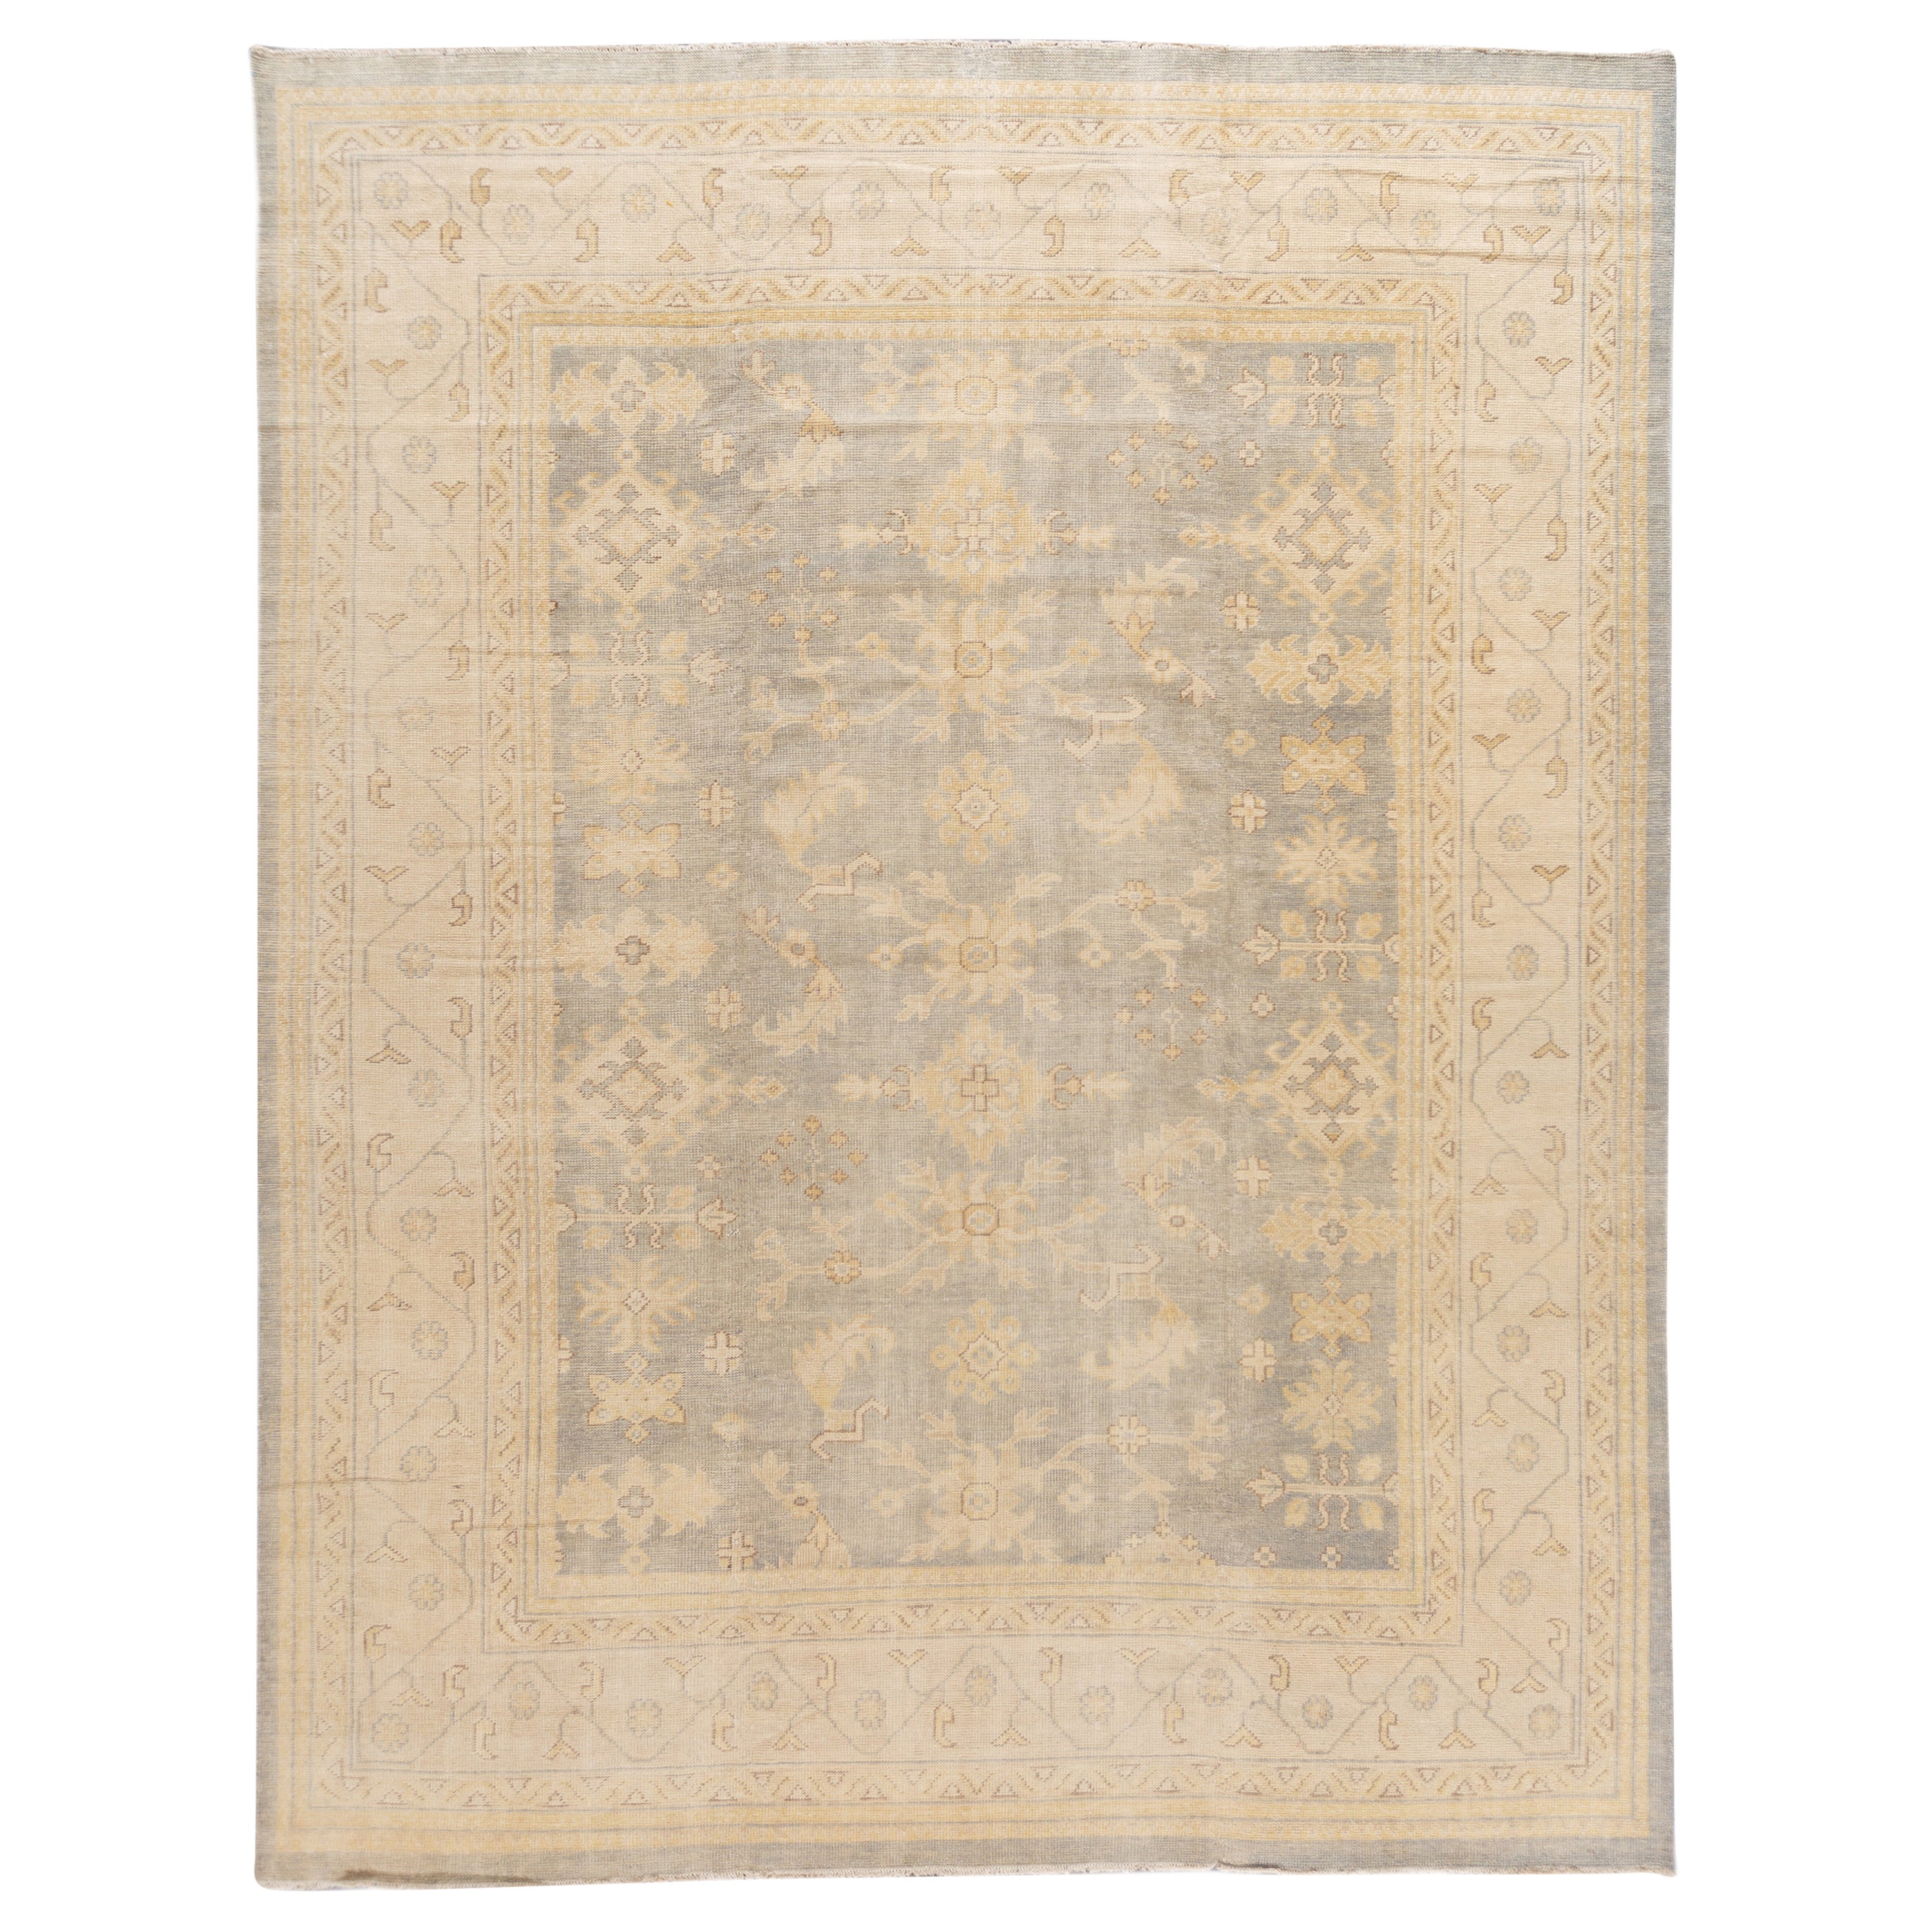 Modern Oushak Style Wool Rug with Gray Handmade Floral Motif